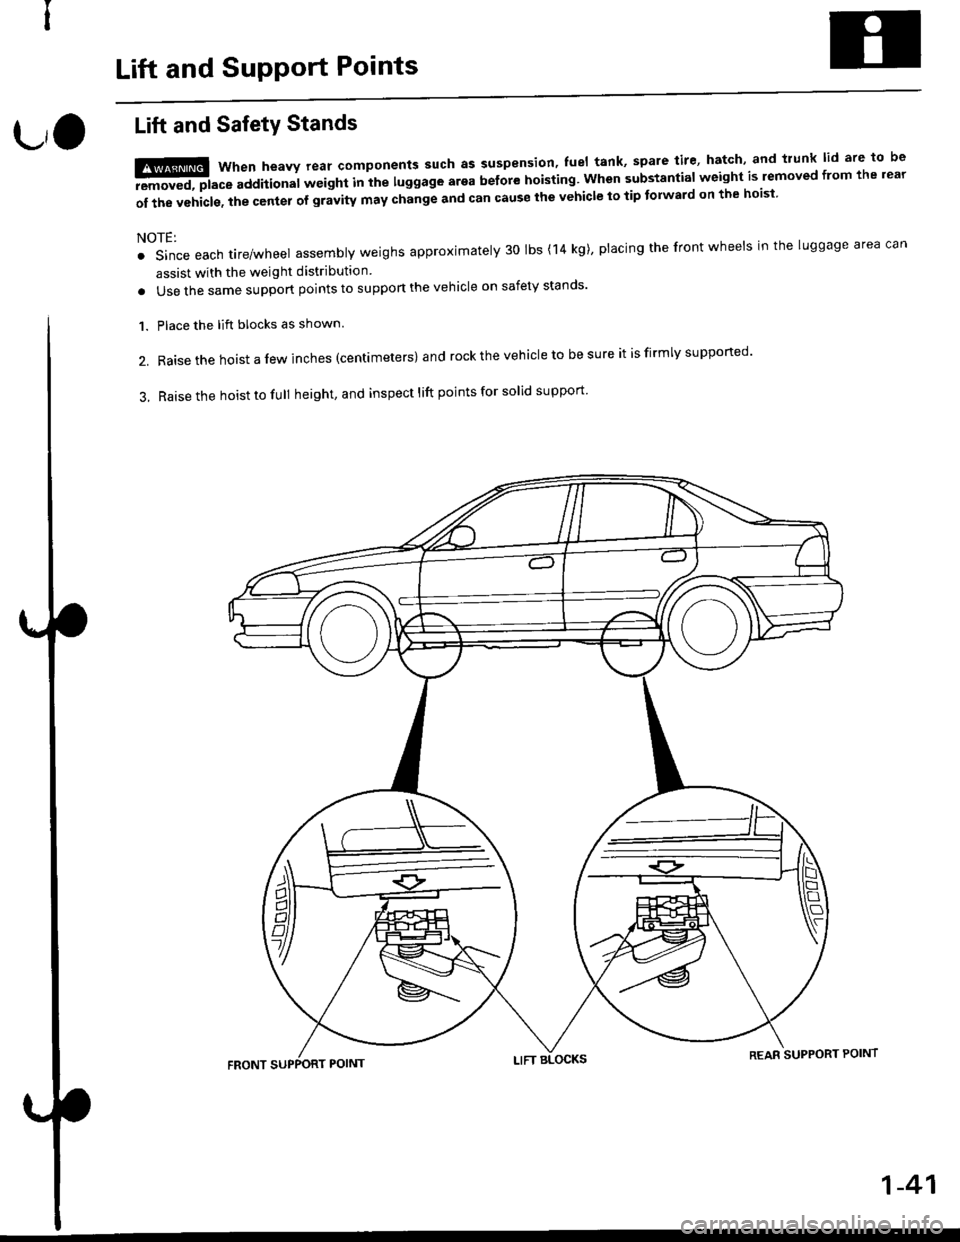 HONDA CIVIC 1996 6.G Service Manual Lift and SupPort Points
L,O
Lift and SafetY Stands
t!ffi when heavv rear components such as suspension fuel tank spare tire hatch and trunk lid are to be
-aEremoved, place additional wetght Inihe 